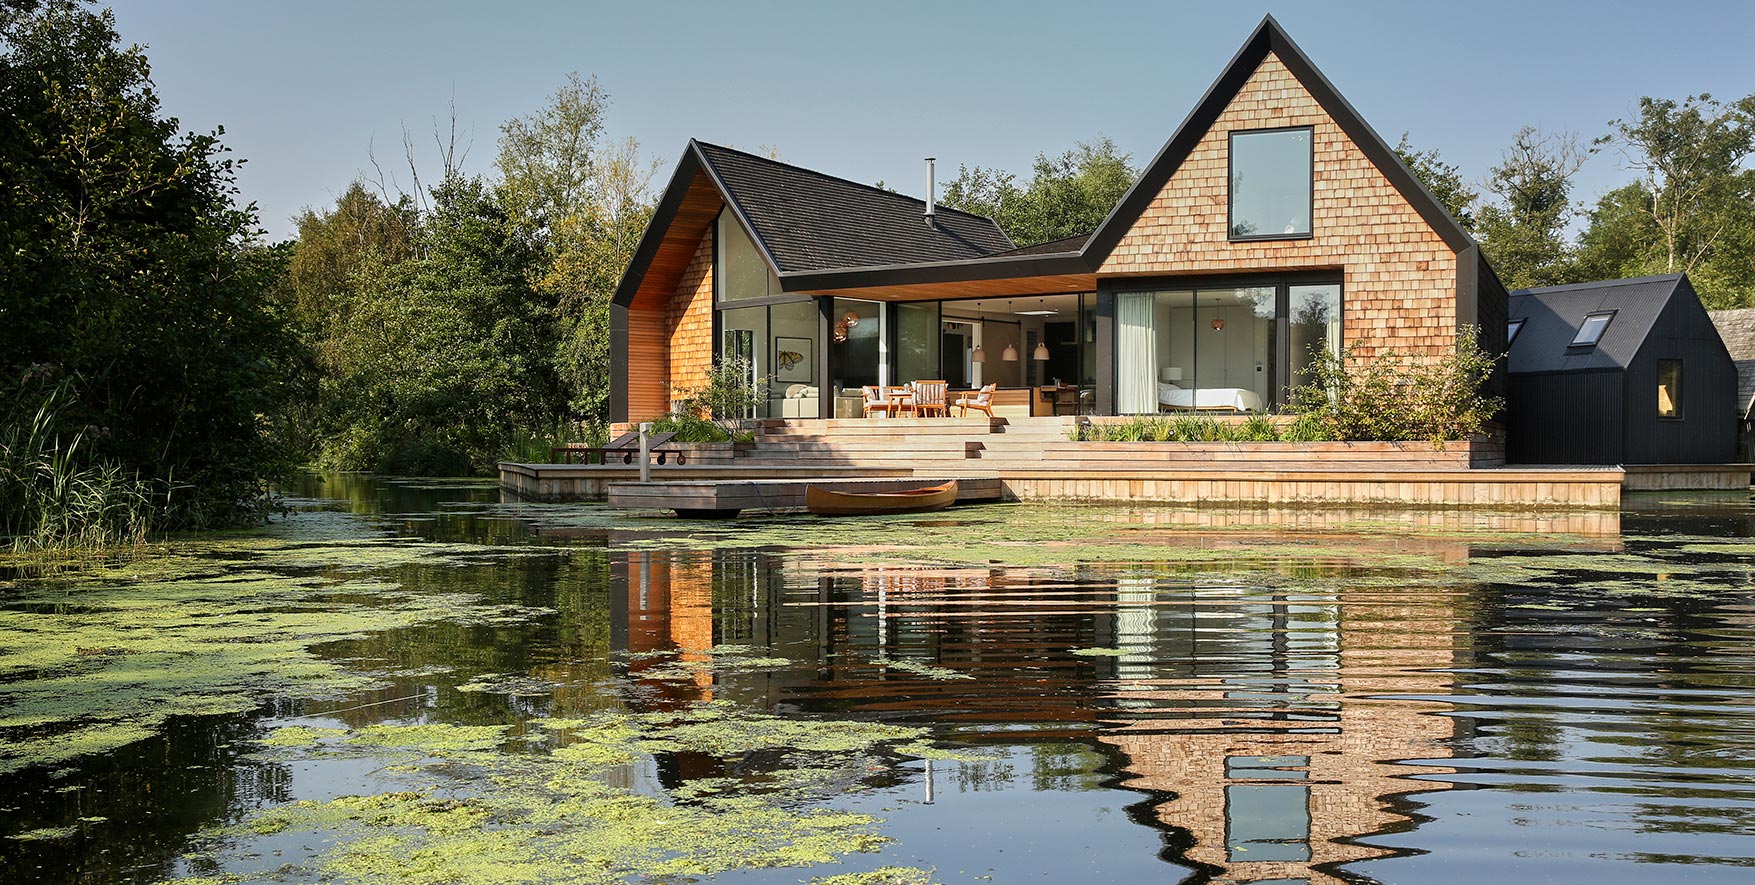 A vacation home in the Norfolk Broads featuring the Axel sliding door hardware from Krownlab